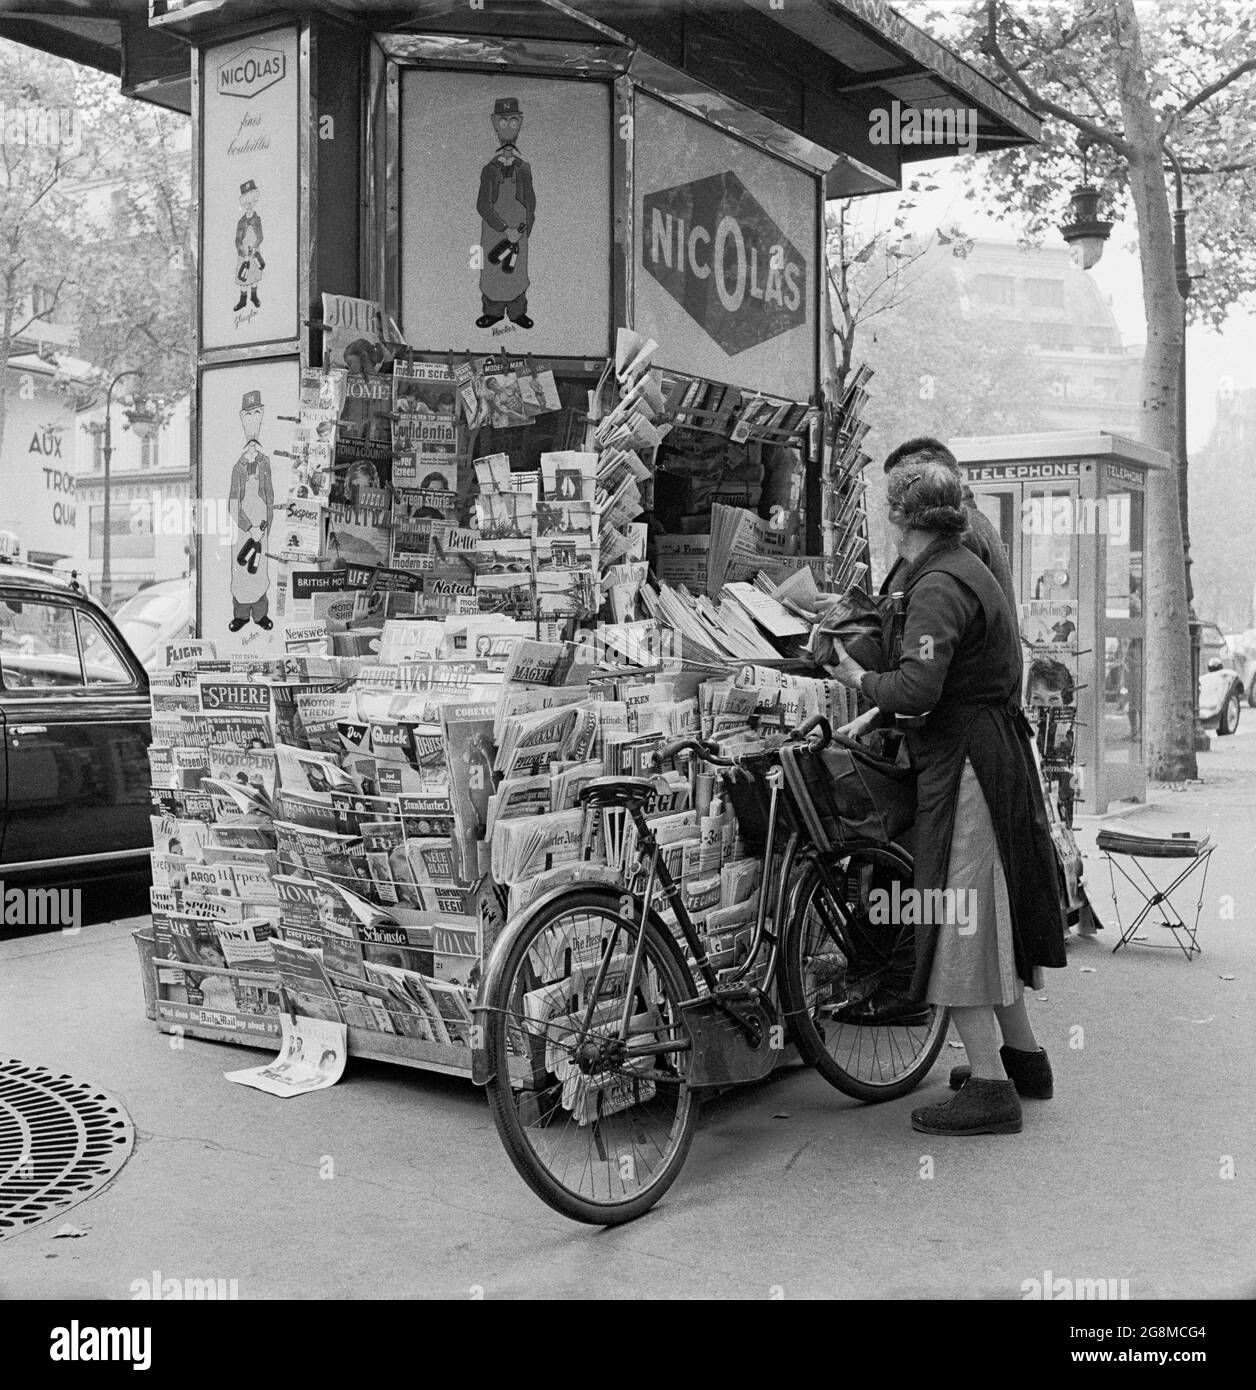 1950s, historical picture of two people, one a lady with her bicycle outside at a newspaper kiosk in central Paris, France. They first made an appearance in 1857, when Baron Haussmann was making renovations to the Parisian landscape. The kiosk is full of newspapers, the reason being that under French law, all the newspaper titles had to be carried, so all political opinion was on display. On the kiosk is advertsing for Nicolas, the long established parisian wine company. Stock Photo